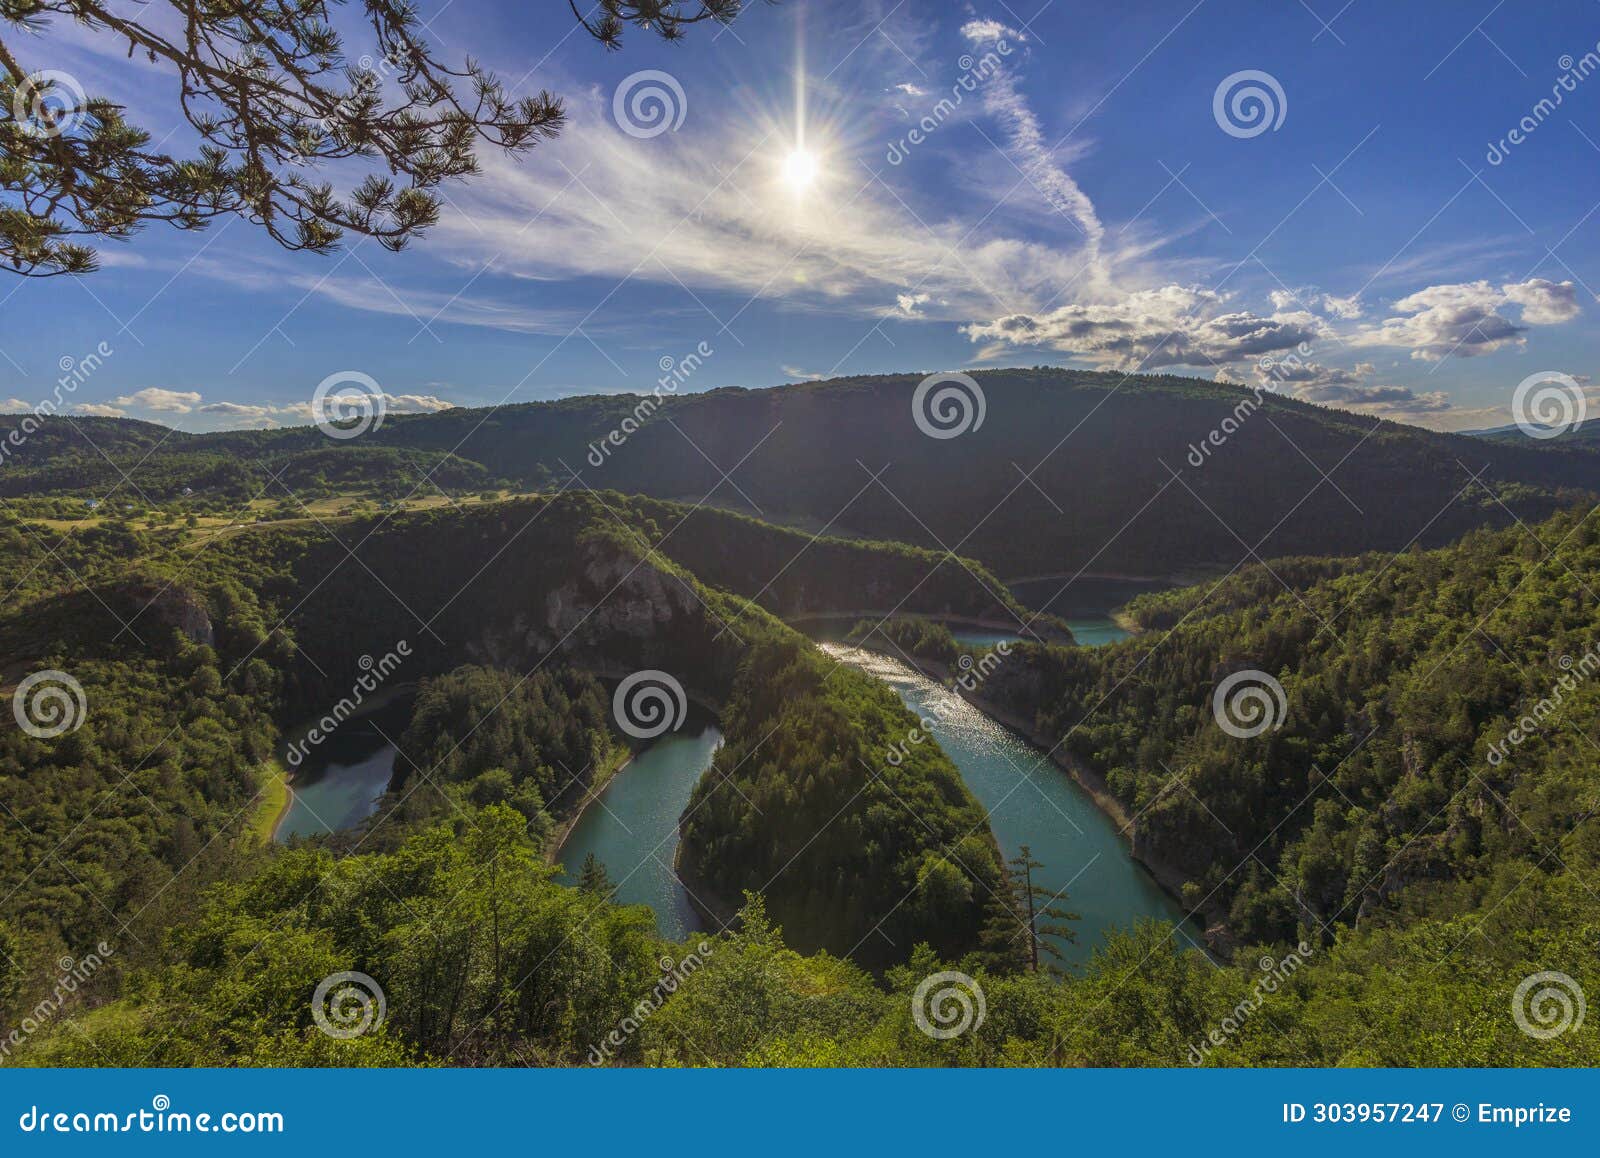 montenegro nature landscape. wonderful view of the meanders of cehotina river